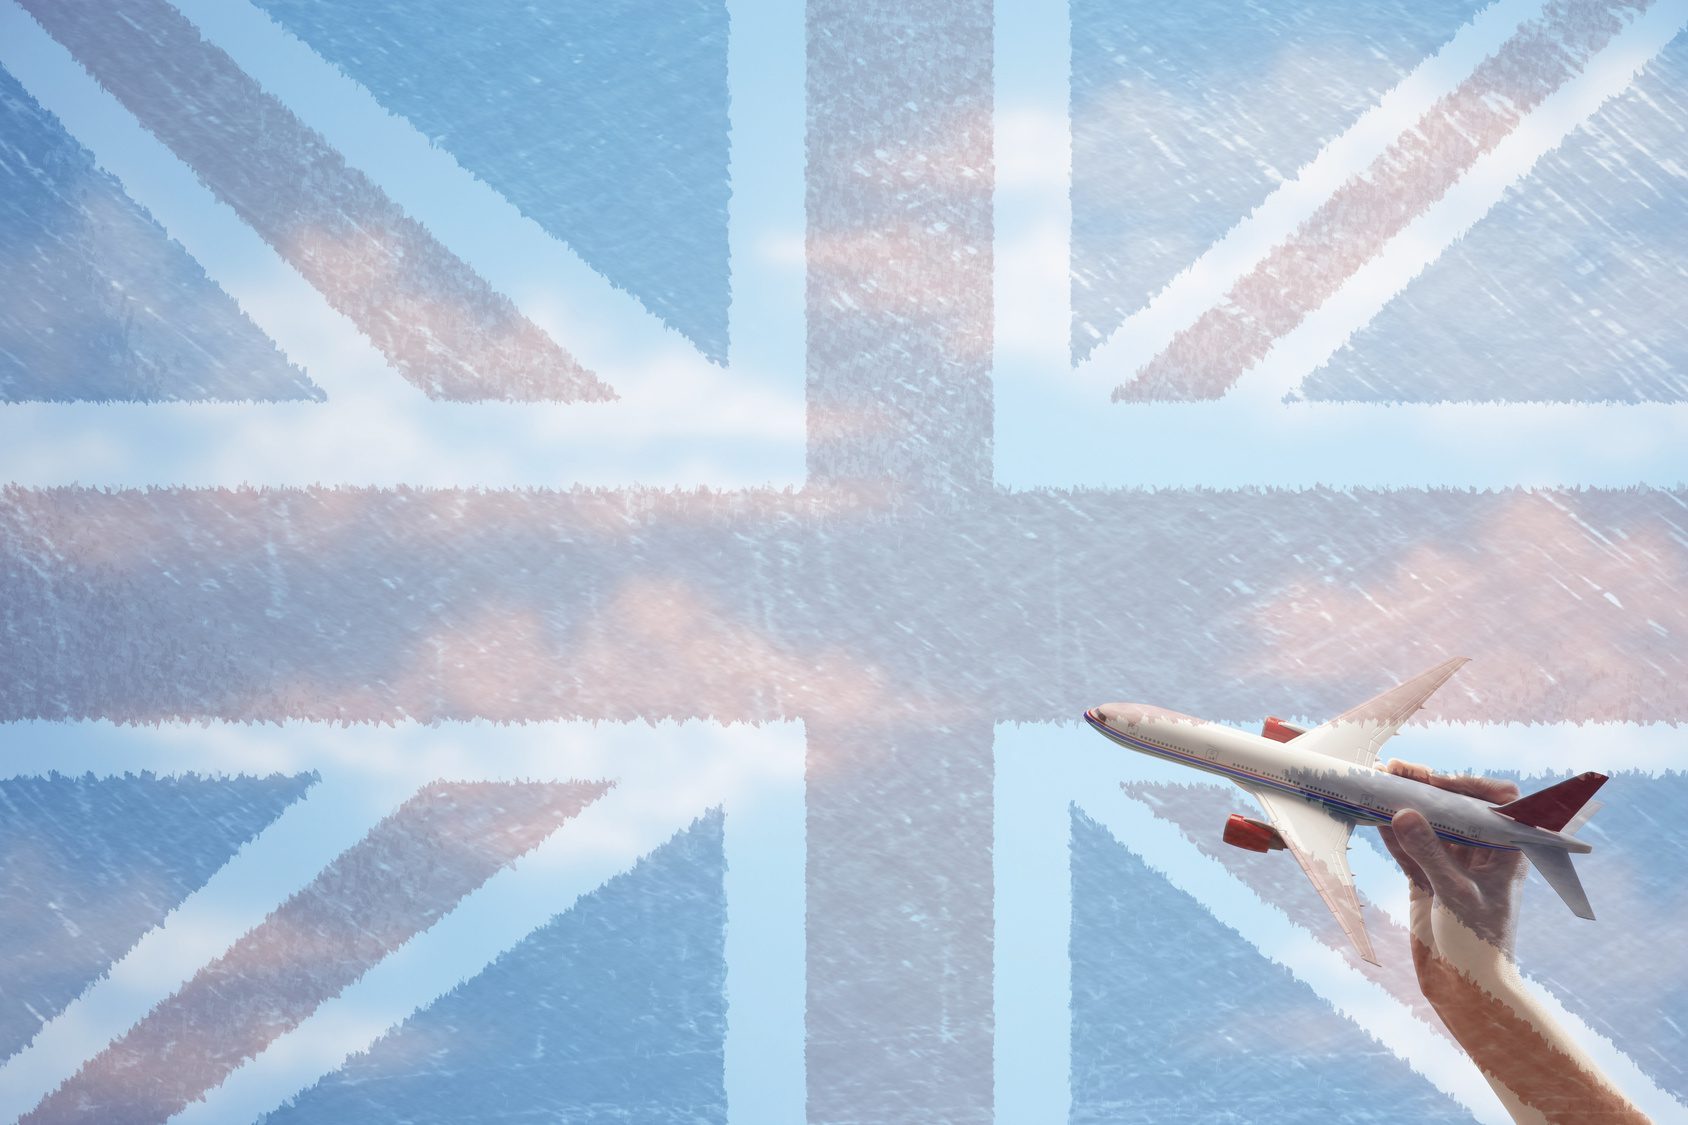 UK Airlines Expected to Face Turbulent Times with Brexit on the Horizon